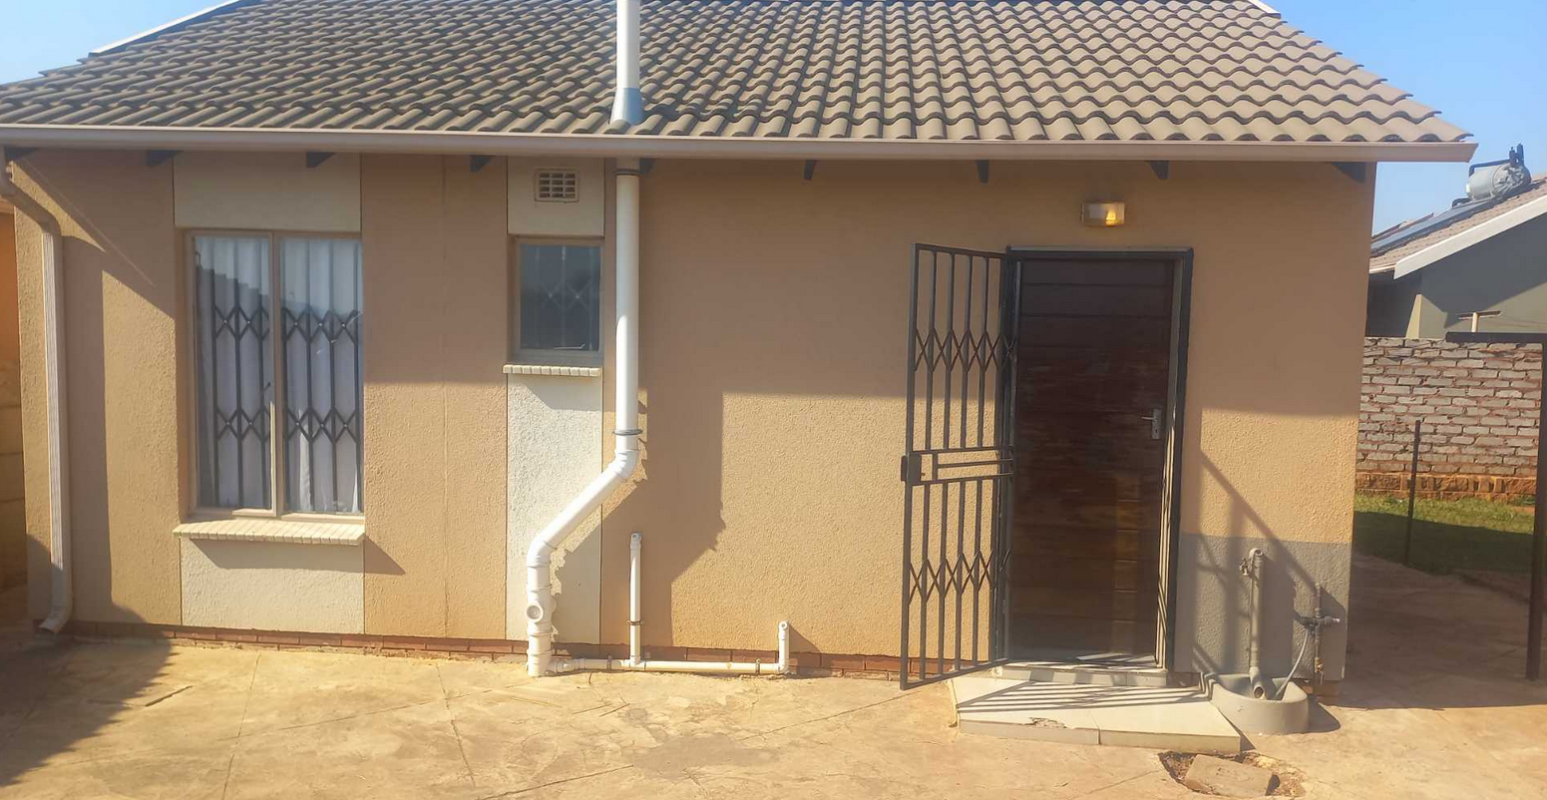 2 Bedroom House  For Sale in Sky City | 1353552 | Property.CoZa